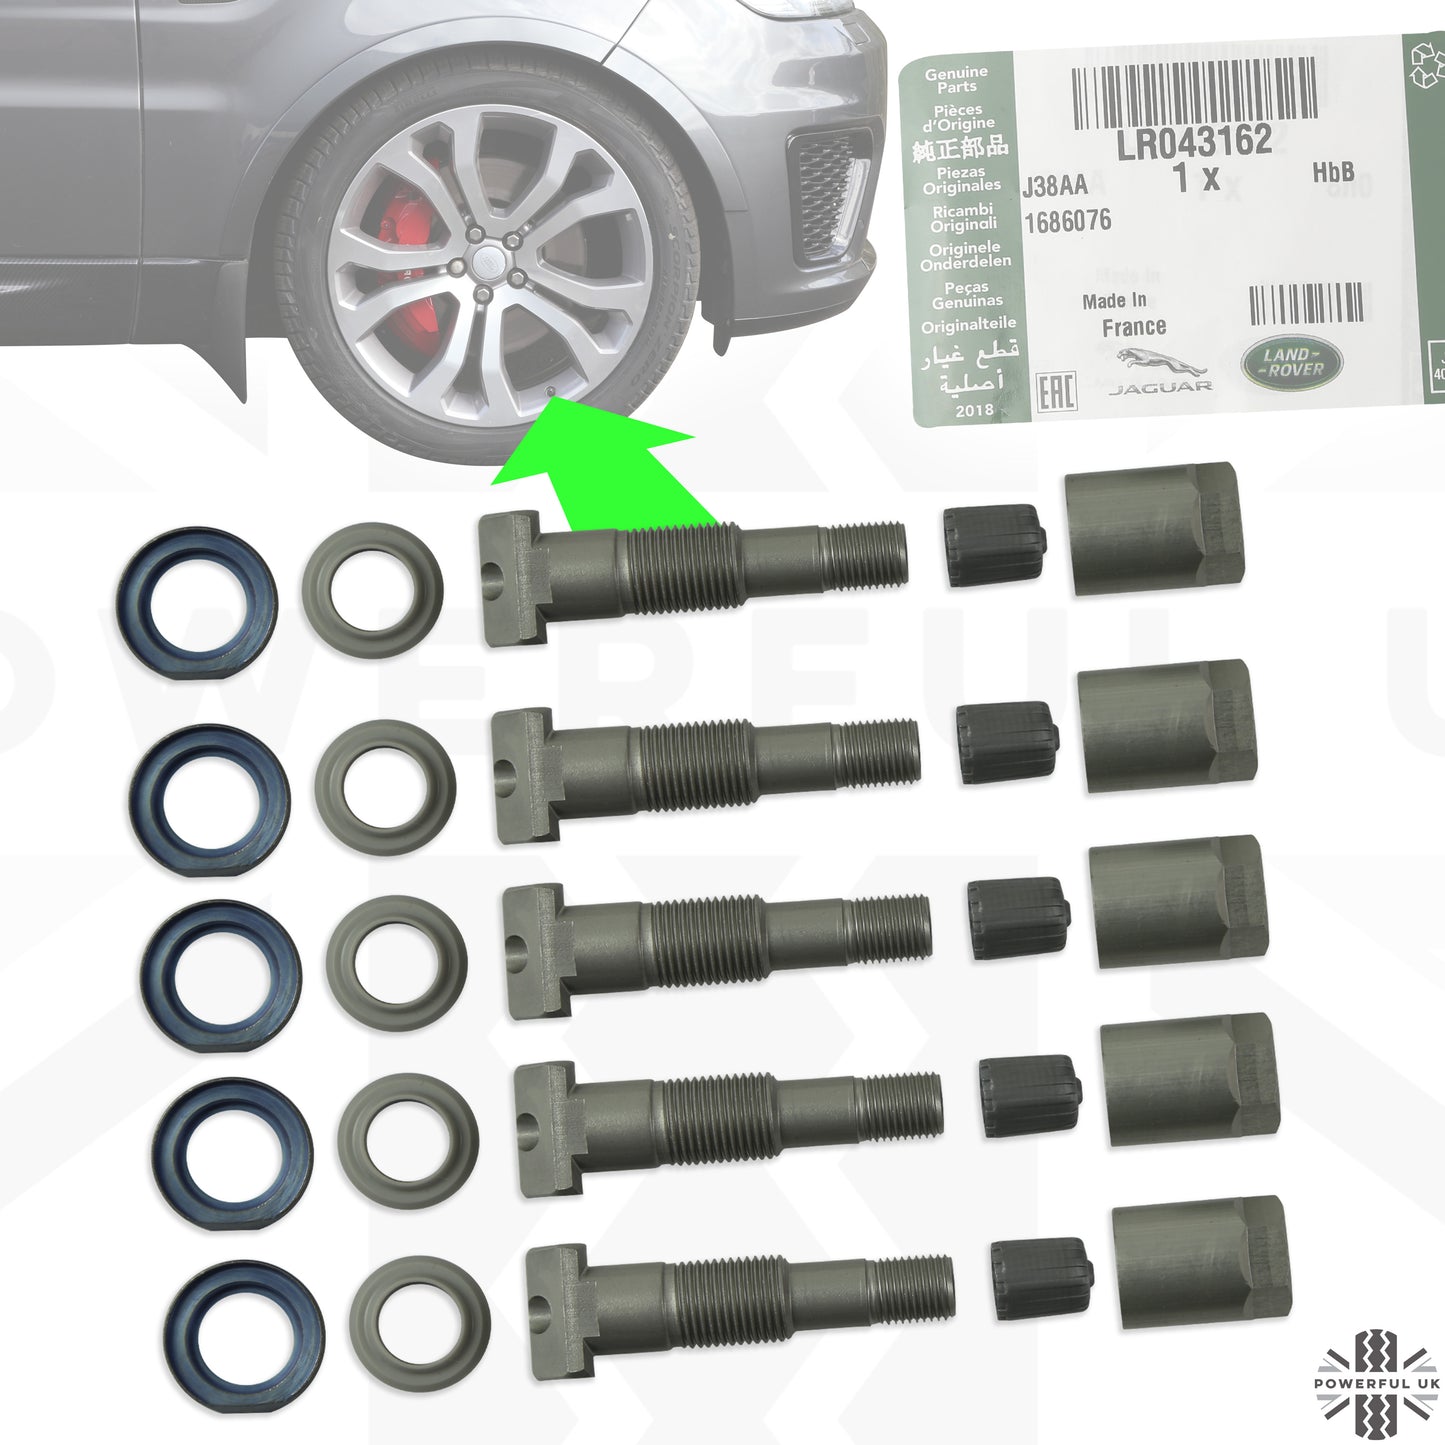 Tyre Pressure Monitoring System (TPMS) Service Kit for Land Rover Discovery 3/4